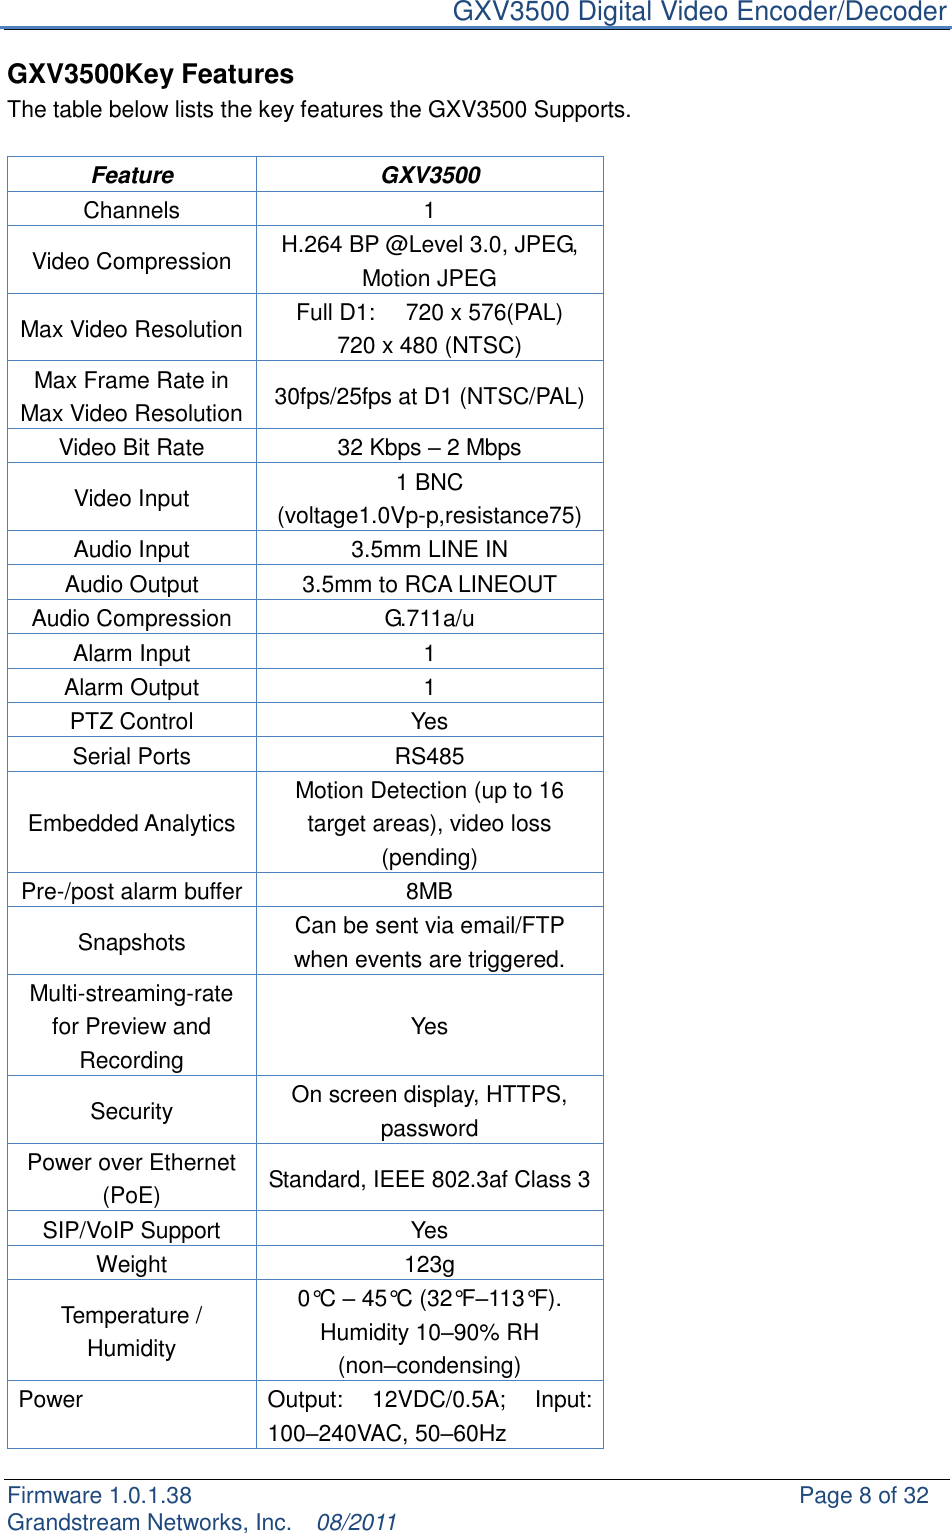     GXV3500 Digital Video Encoder/Decoder Firmware 1.0.1.38                                                     Page 8 of 32     Grandstream Networks, Inc.  08/2011  GXV3500Key Features   The table below lists the key features the GXV3500 Supports.  Feature GXV3500 Channels 1 Video Compression H.264 BP @Level 3.0, JPEG, Motion JPEG Max Video Resolution Full D1:     720 x 576(PAL)     720 x 480 (NTSC) Max Frame Rate in Max Video Resolution 30fps/25fps at D1 (NTSC/PAL) Video Bit Rate 32 Kbps – 2 Mbps Video Input 1 BNC (voltage1.0Vp-p,resistance75) Audio Input 3.5mm LINE IN Audio Output 3.5mm to RCA LINEOUT Audio Compression G.711a/u Alarm Input 1 Alarm Output 1 PTZ Control Yes Serial Ports RS485 Embedded Analytics Motion Detection (up to 16 target areas), video loss (pending) Pre-/post alarm buffer 8MB Snapshots Can be sent via email/FTP when events are triggered. Multi-streaming-rate for Preview and Recording Yes Security On screen display, HTTPS, password Power over Ethernet (PoE) Standard, IEEE 802.3af Class 3 SIP/VoIP Support Yes Weight 123g Temperature / Humidity 0°C – 45°C (32°F–113°F). Humidity 10–90% RH (non–condensing) Power Output:  12VDC/0.5A;  Input: 100–240VAC, 50–60Hz 